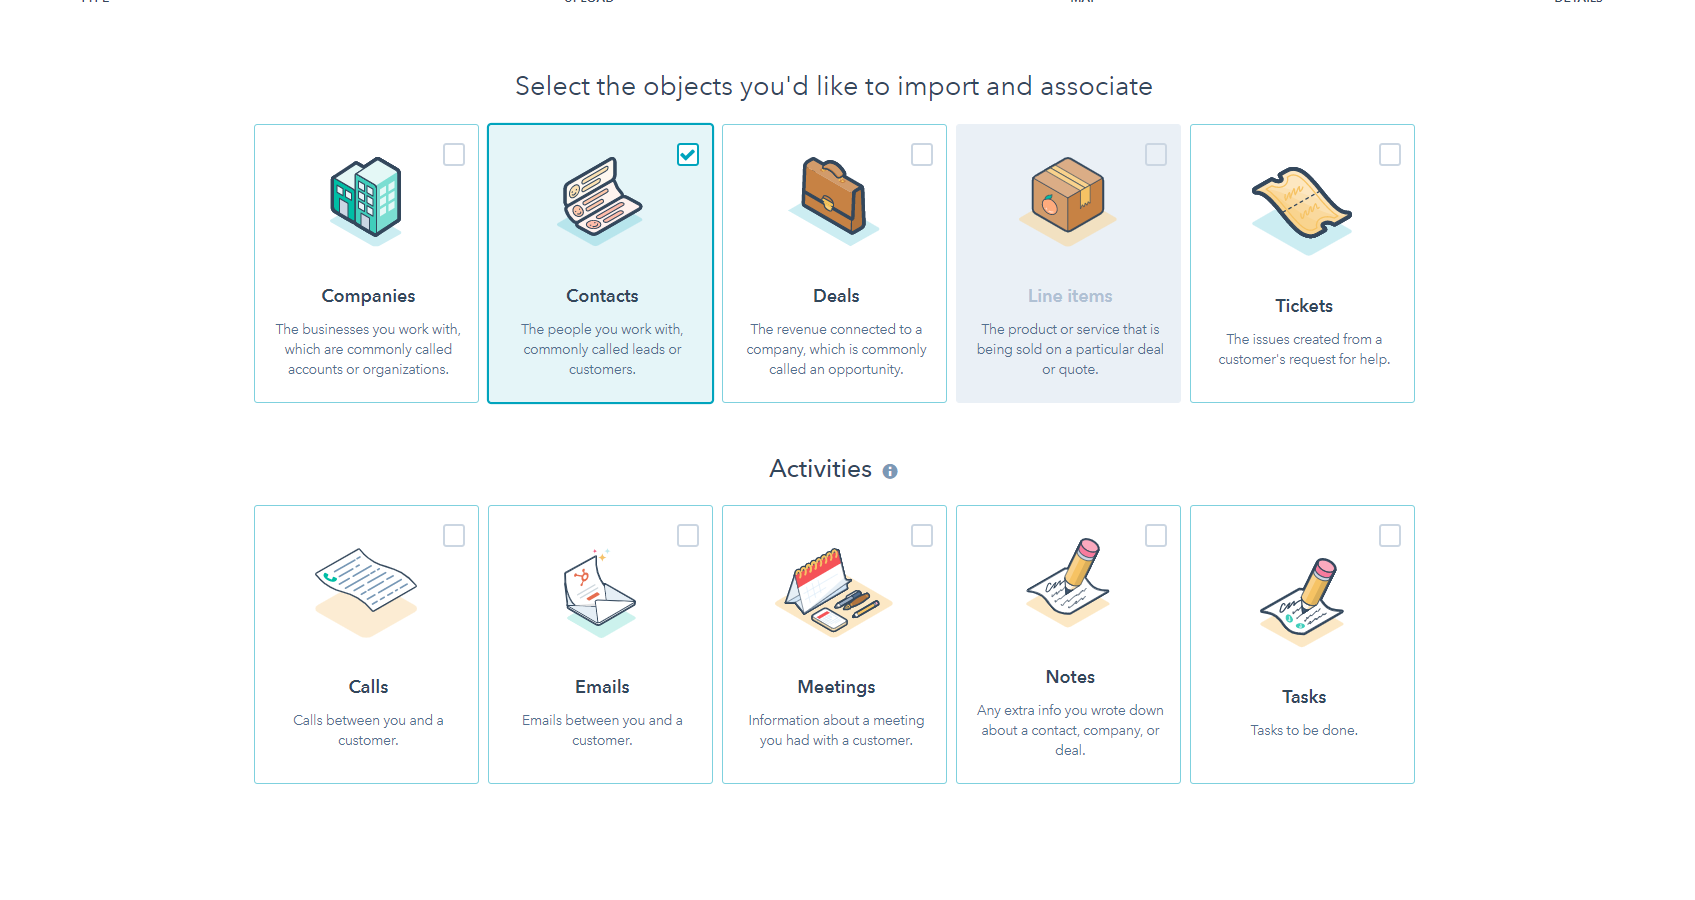 Object Import options for HubSpot